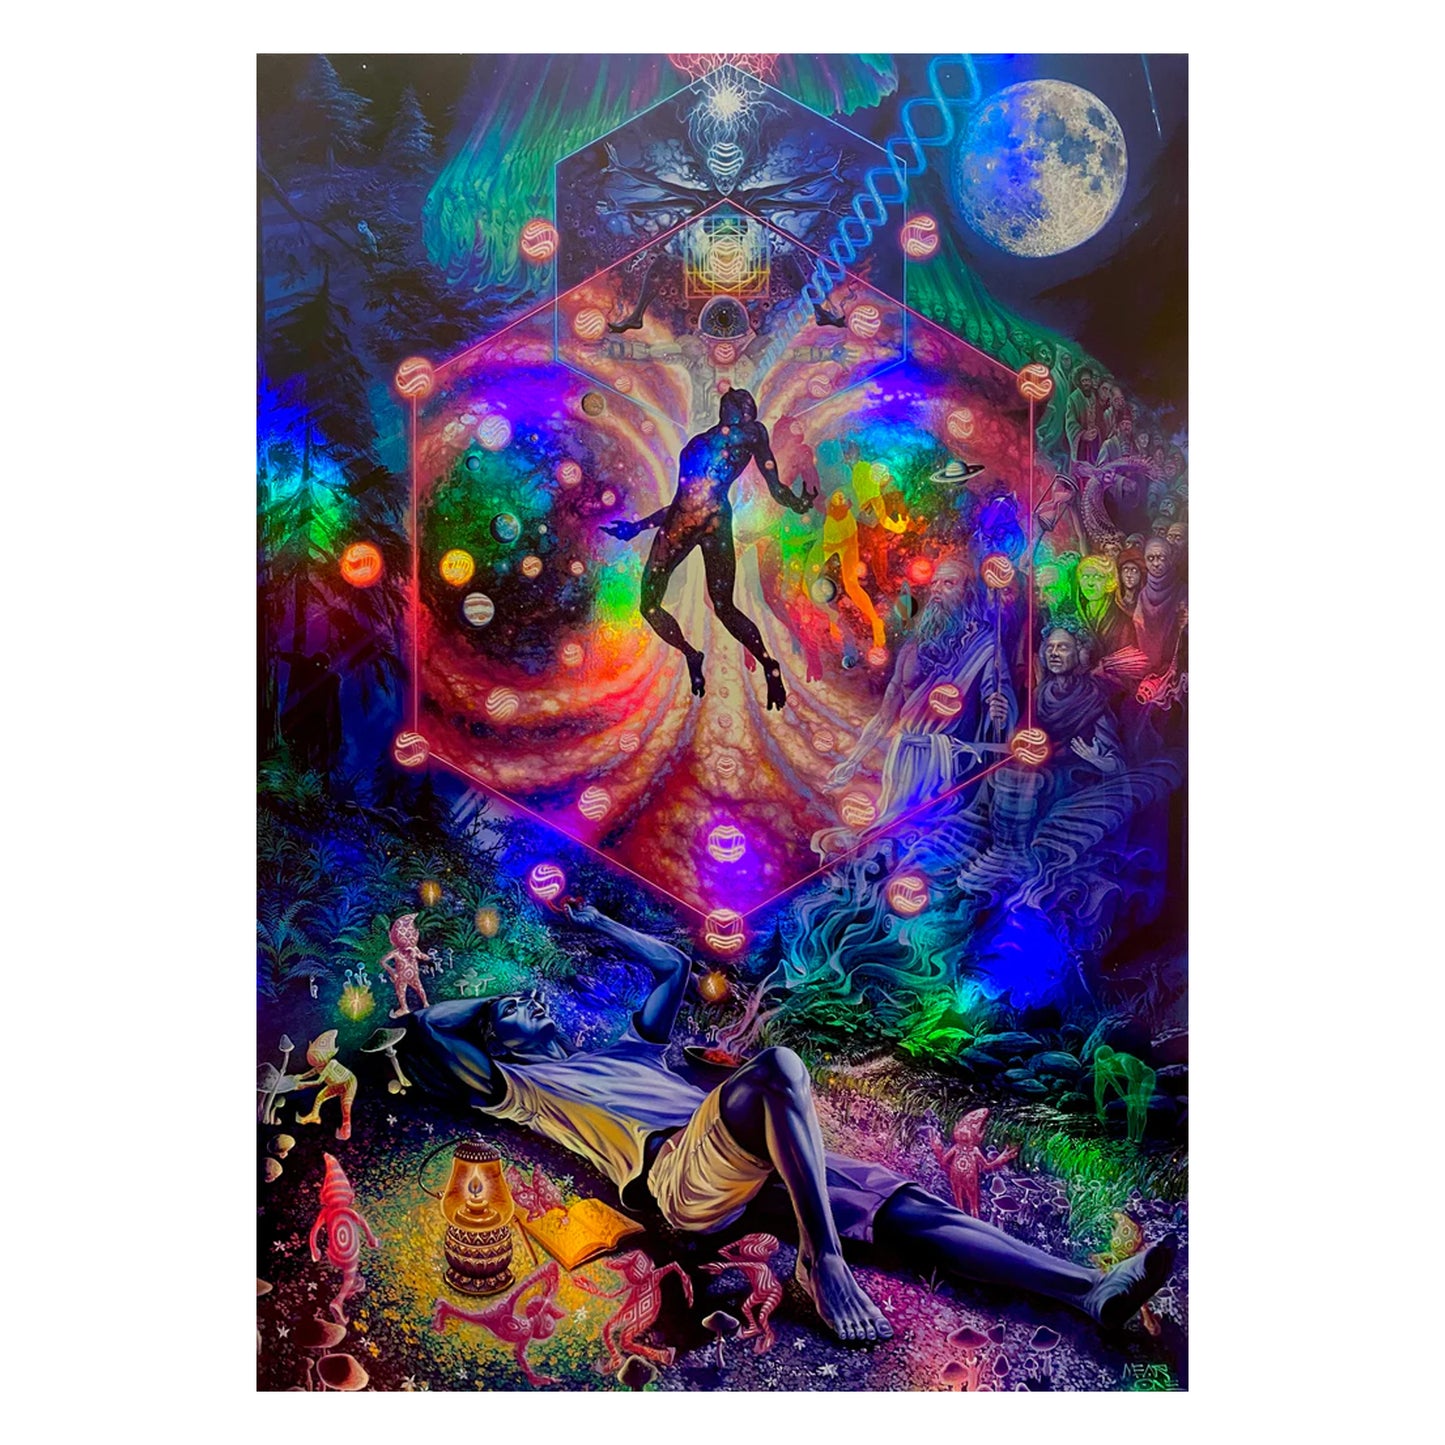 Mear One Lithograph- "A MIDSUMMER NIGHT'S TRIP"